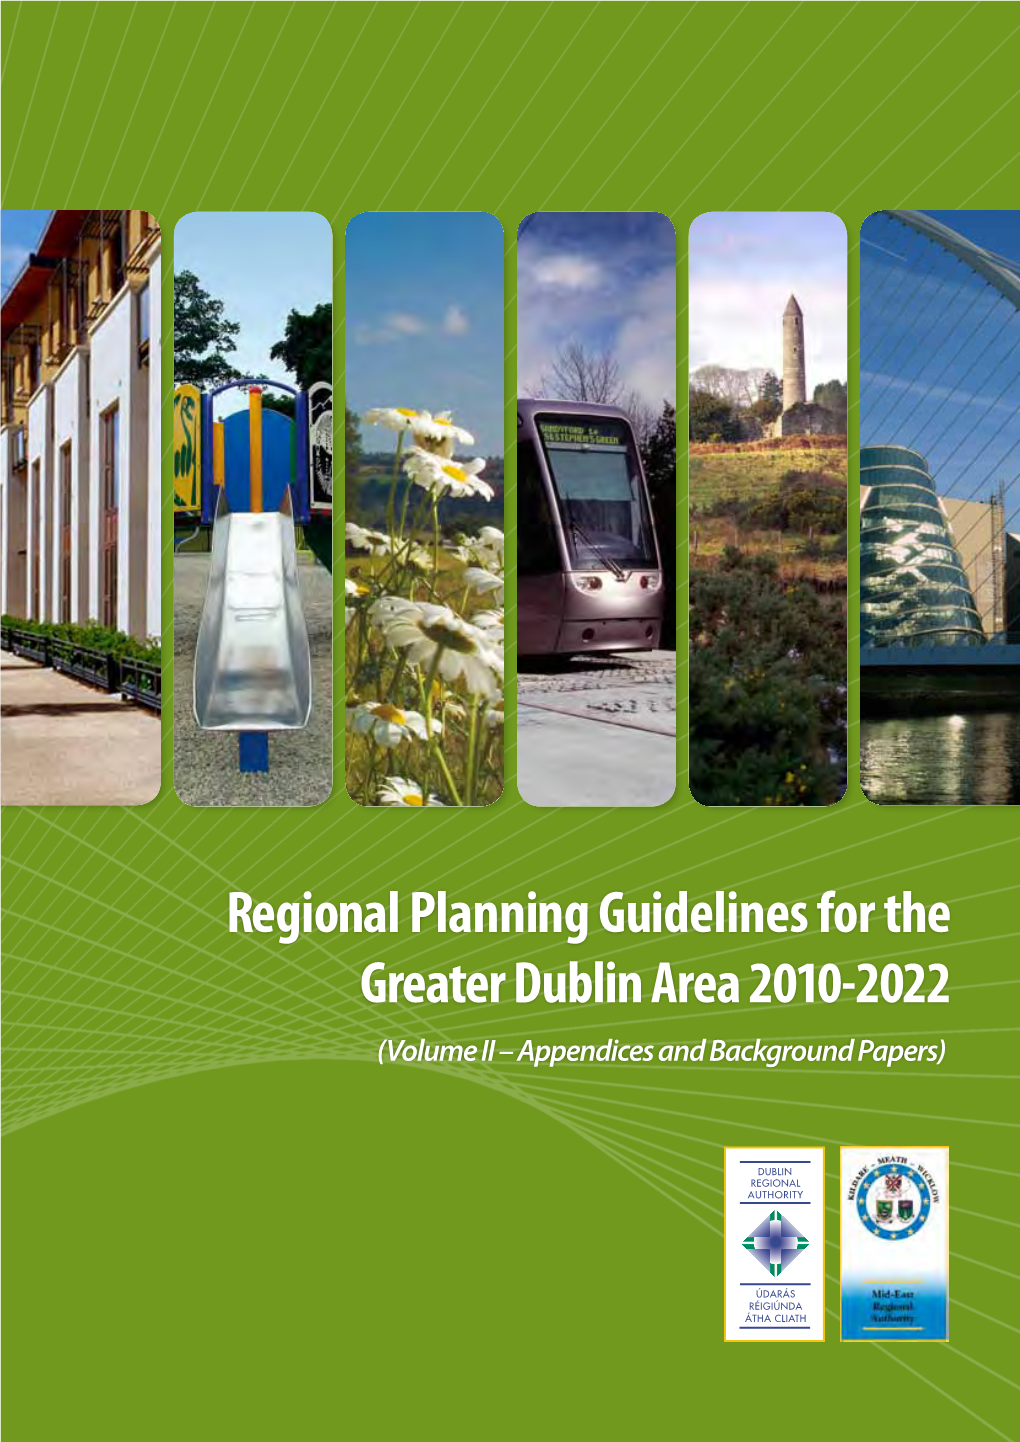 Regional Planning Guidelines for the Greater Dublin Area 2010-2022 (Volume II – Appendices and Background Papers)